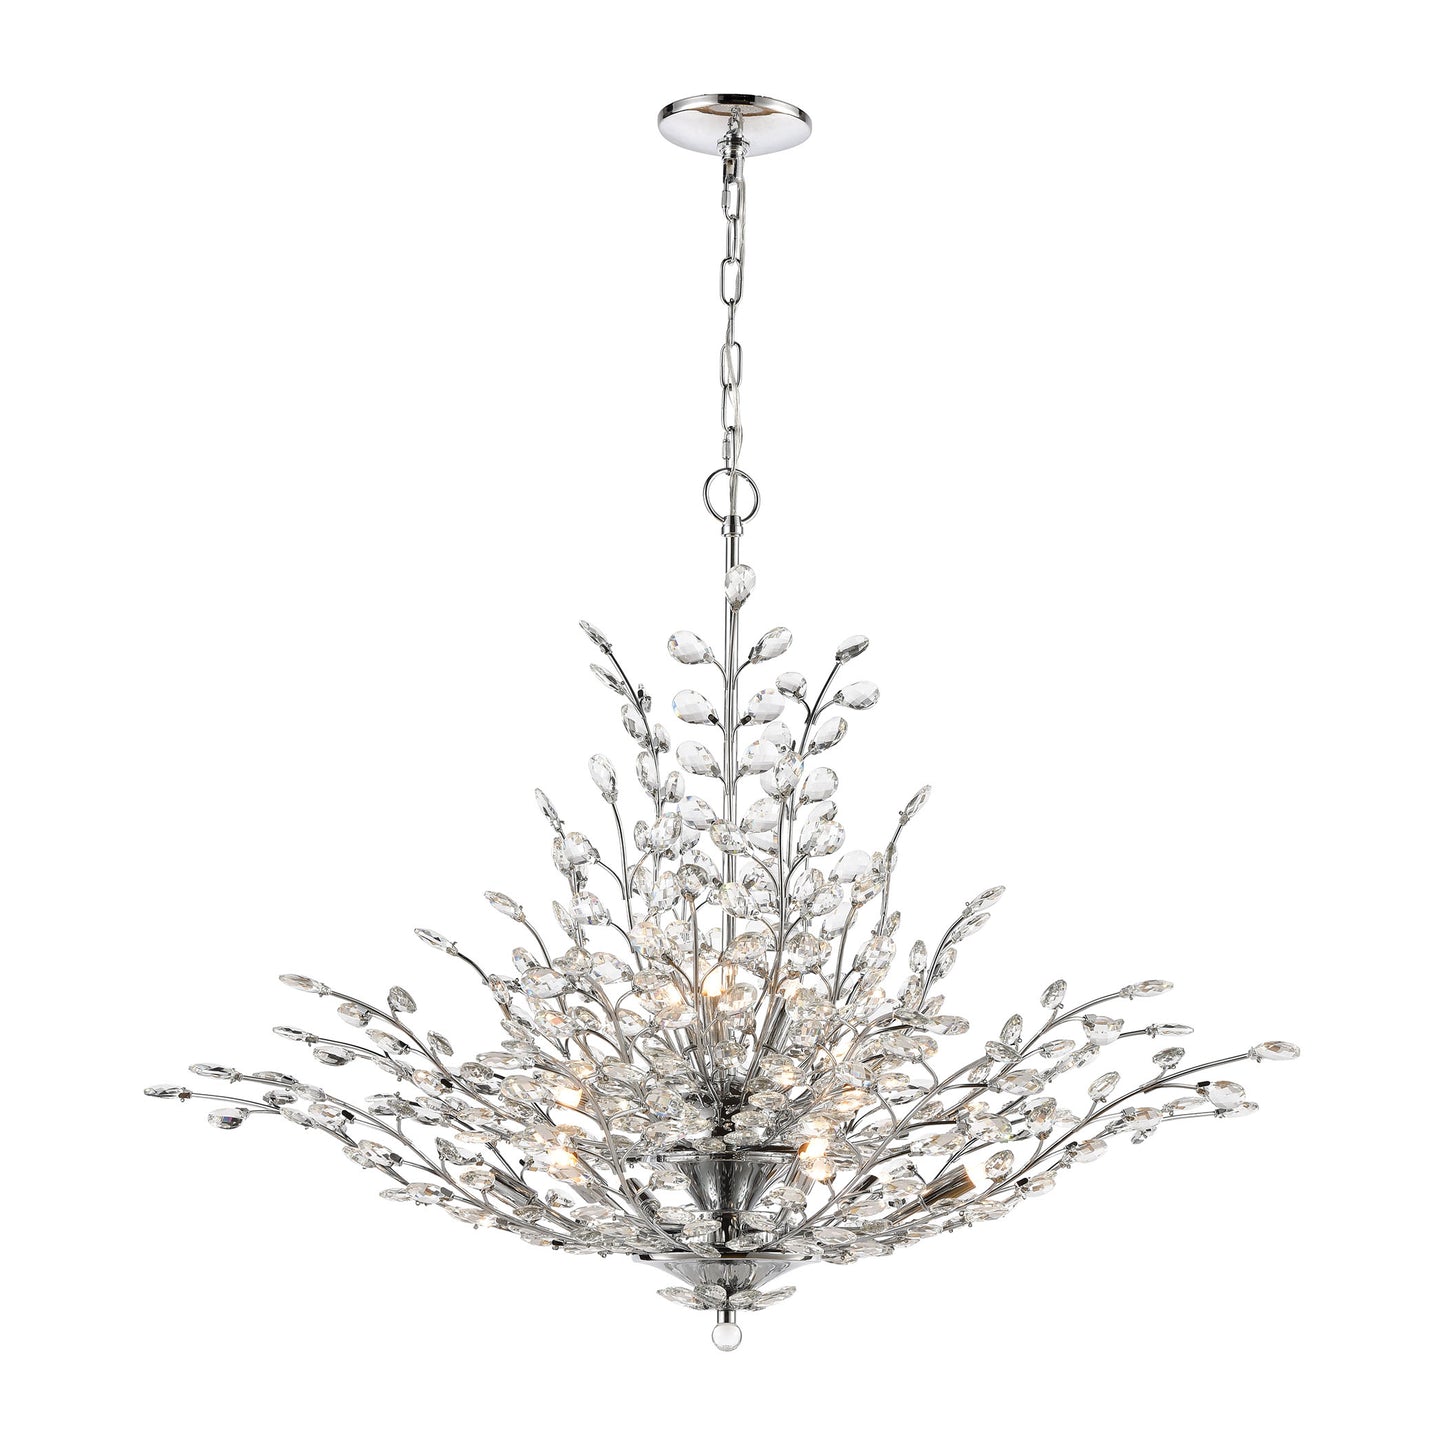 ELK Lighting 45464/12 - Crystique 38" Wide 12-Light Chandelier in Polished Chrome with Clear Crystal